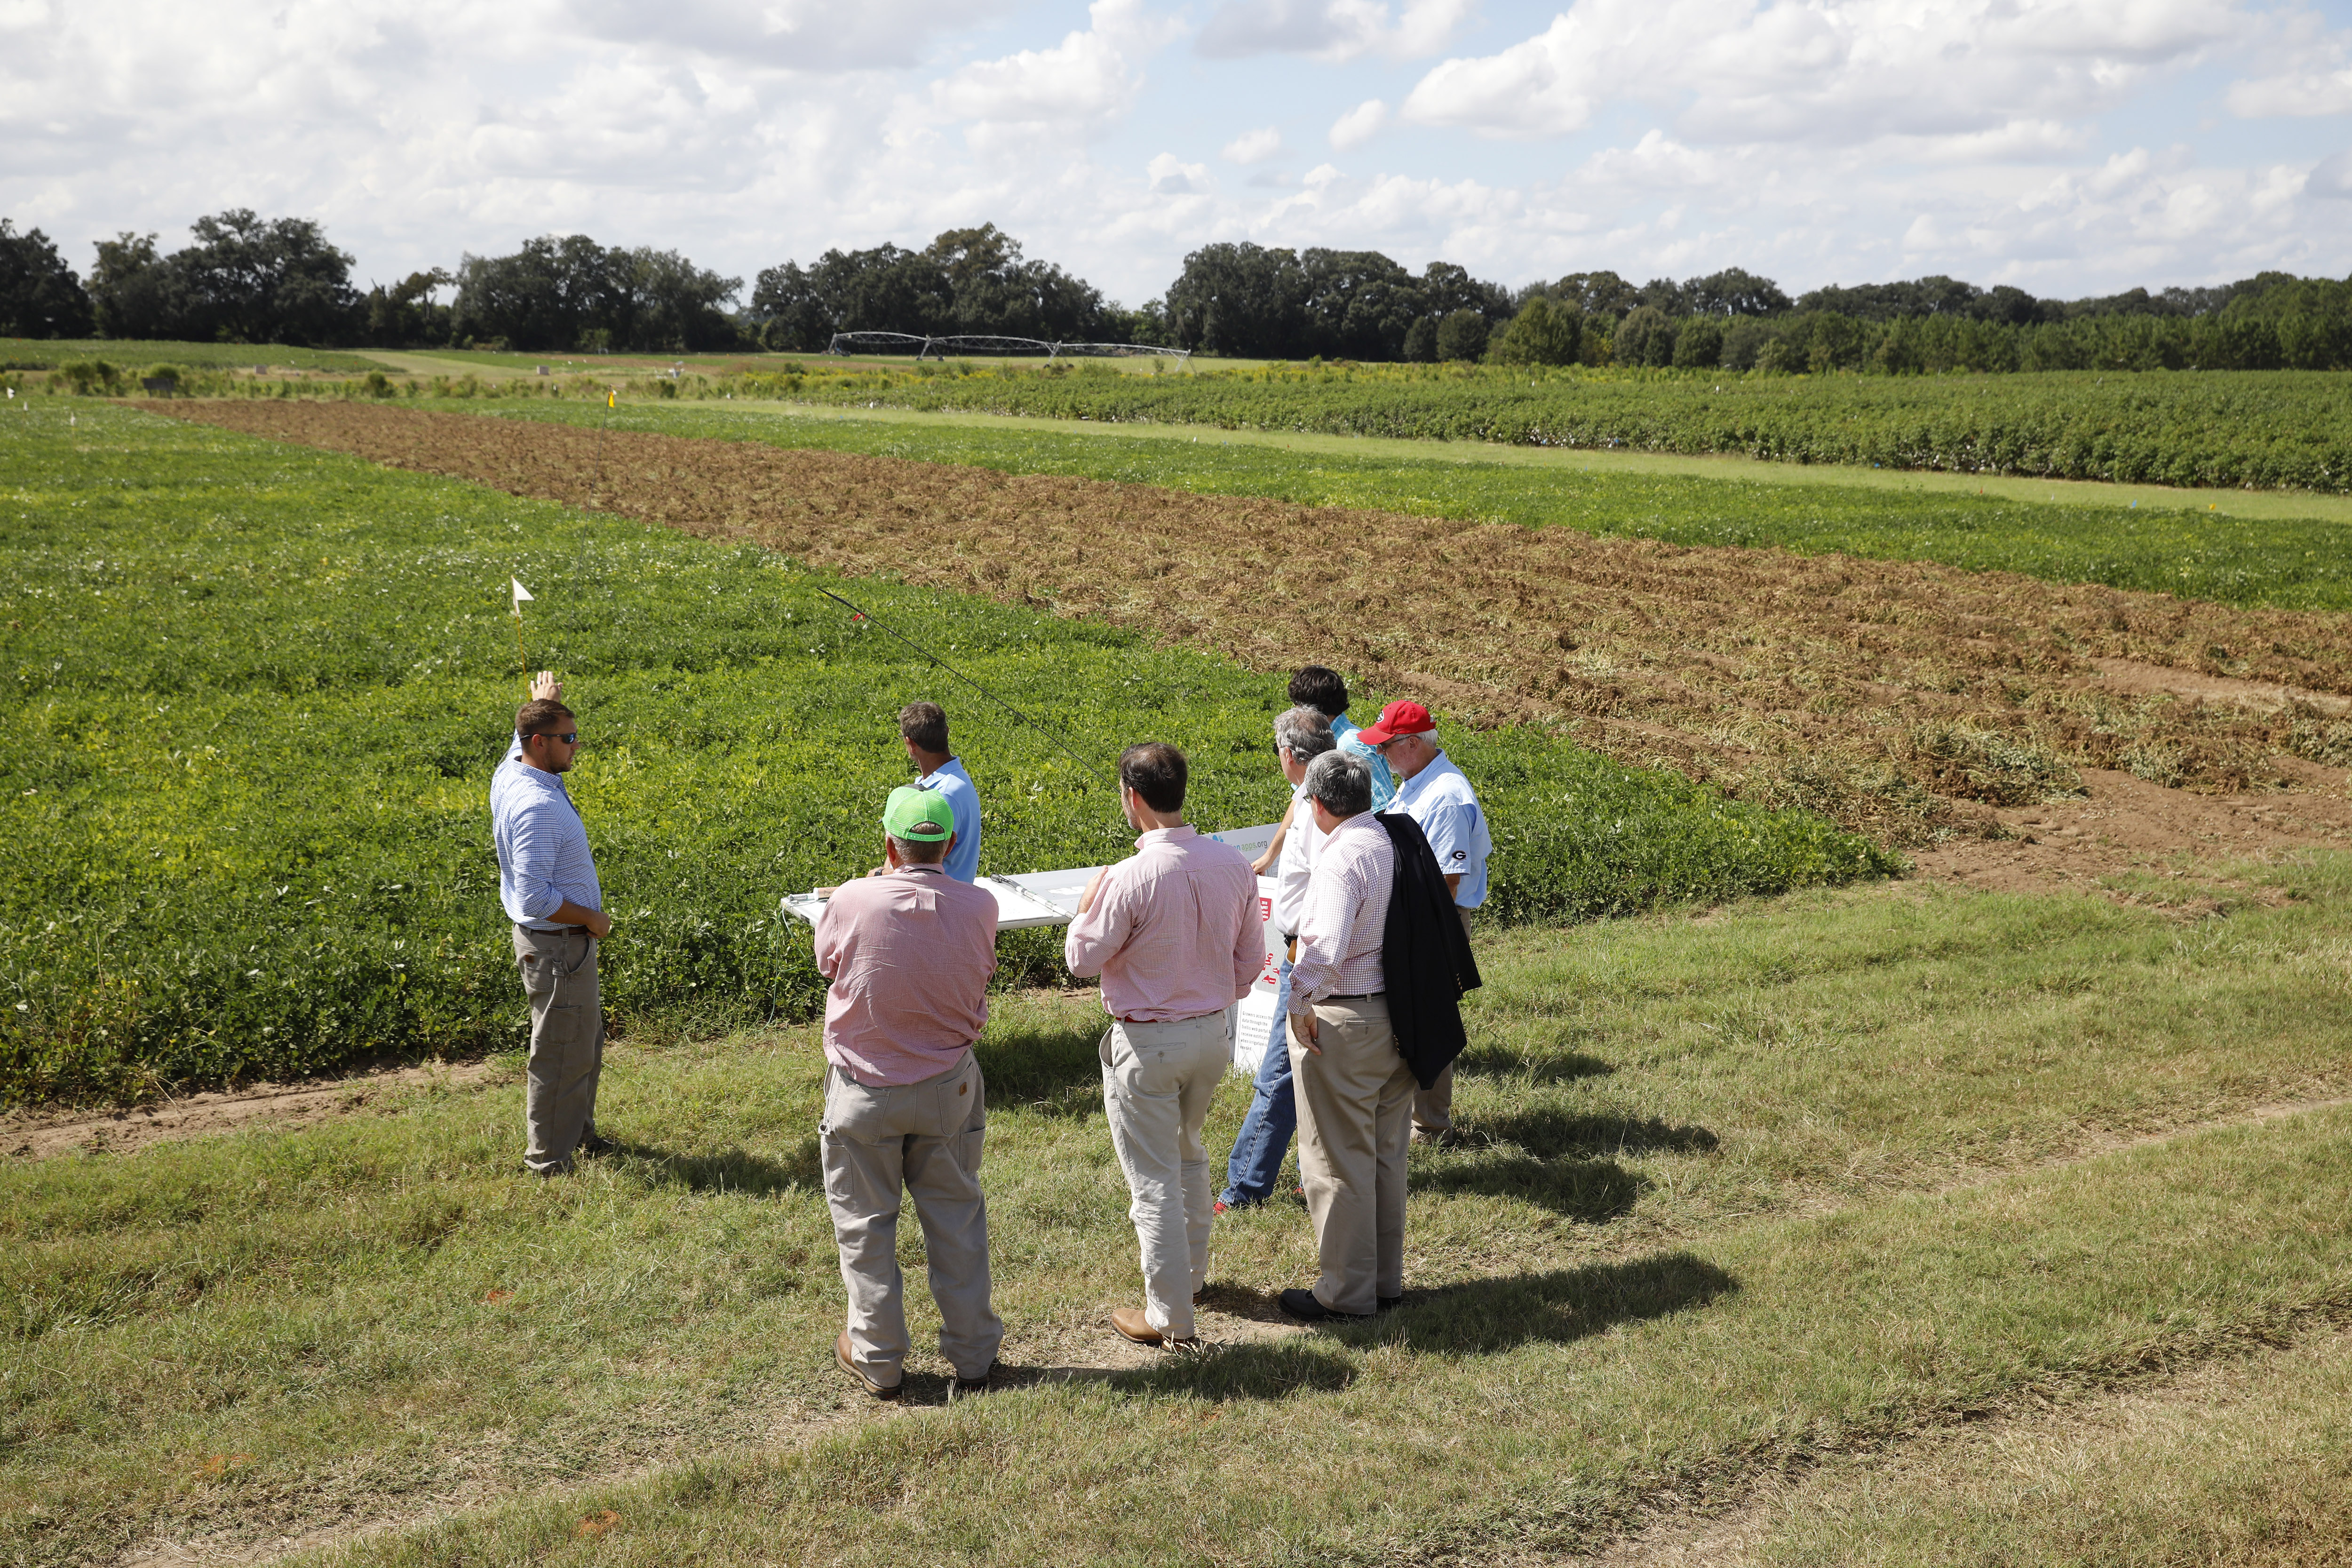 Farm Tour highlights diversity of agriculture industry UGA Today